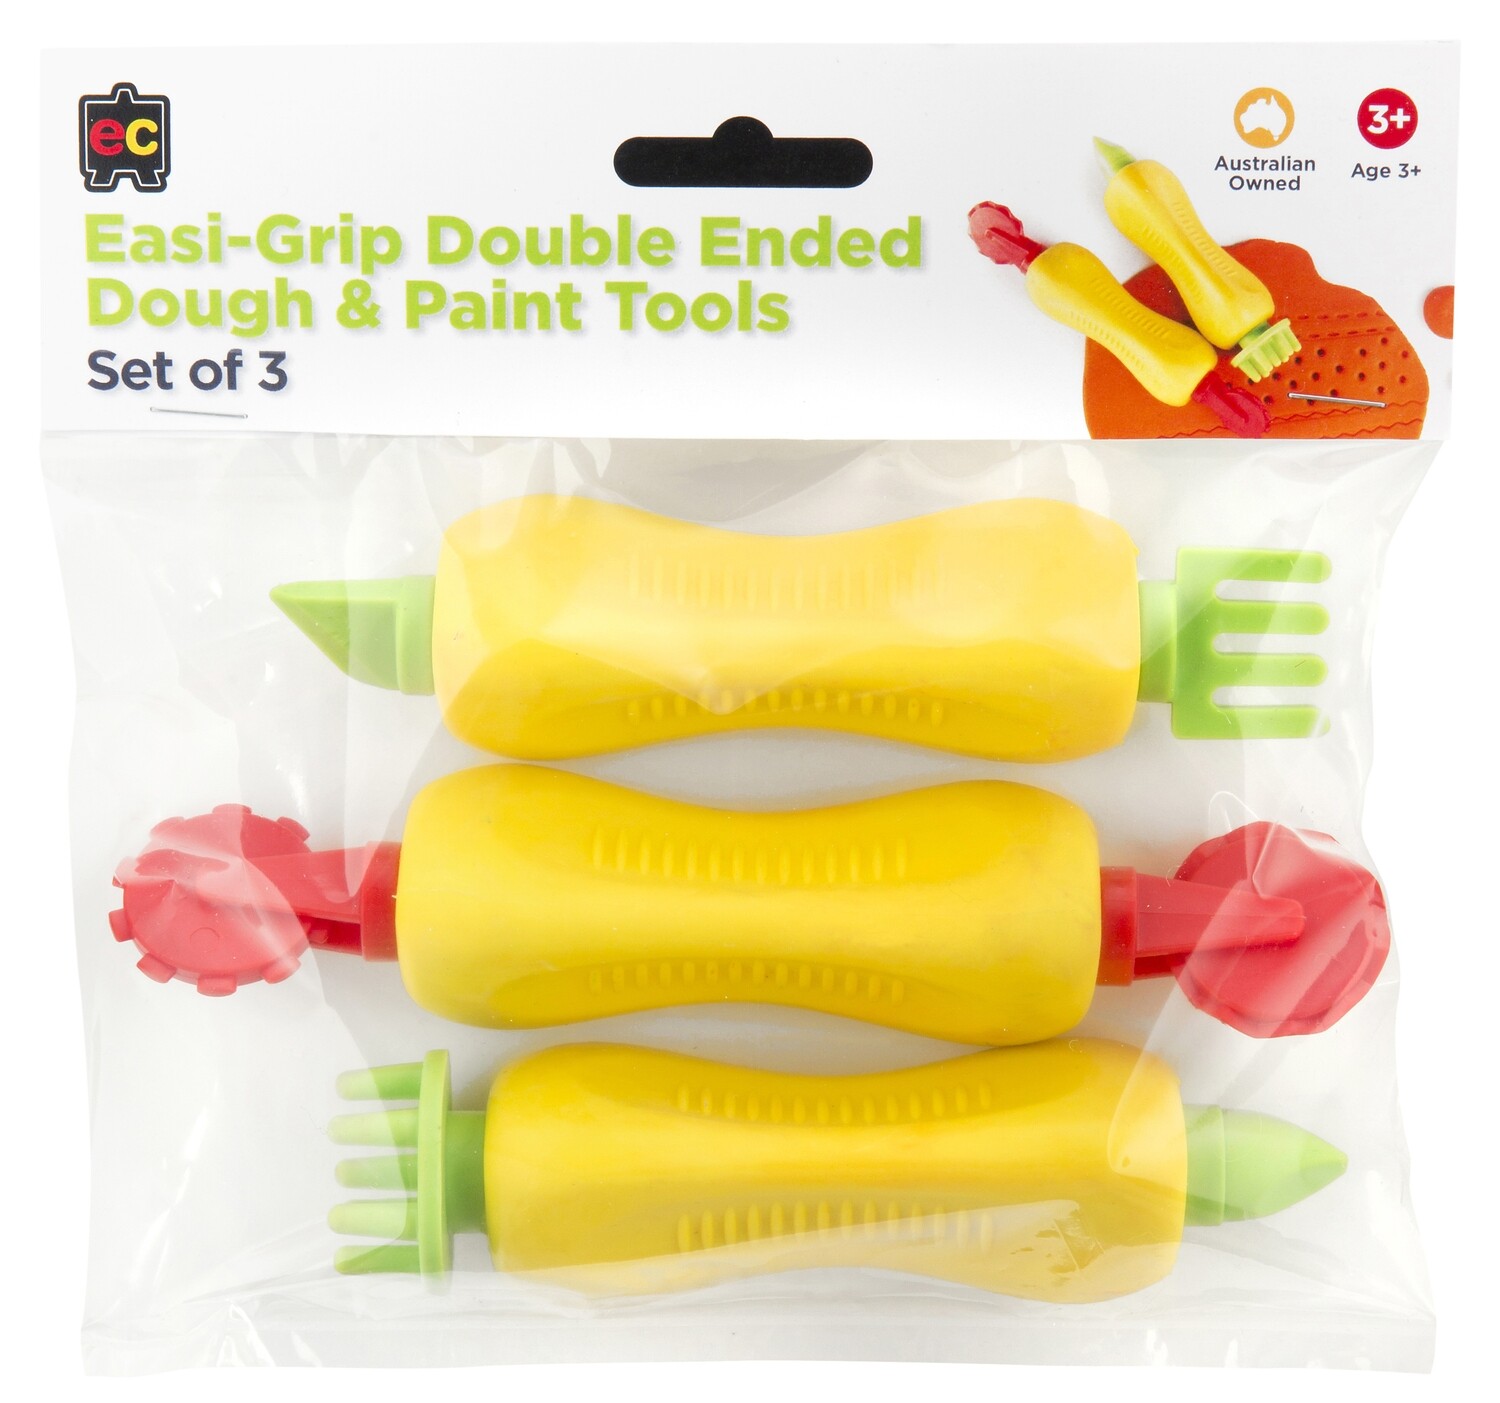 Easy-Grip Double Ended Dough & Paint Tolls